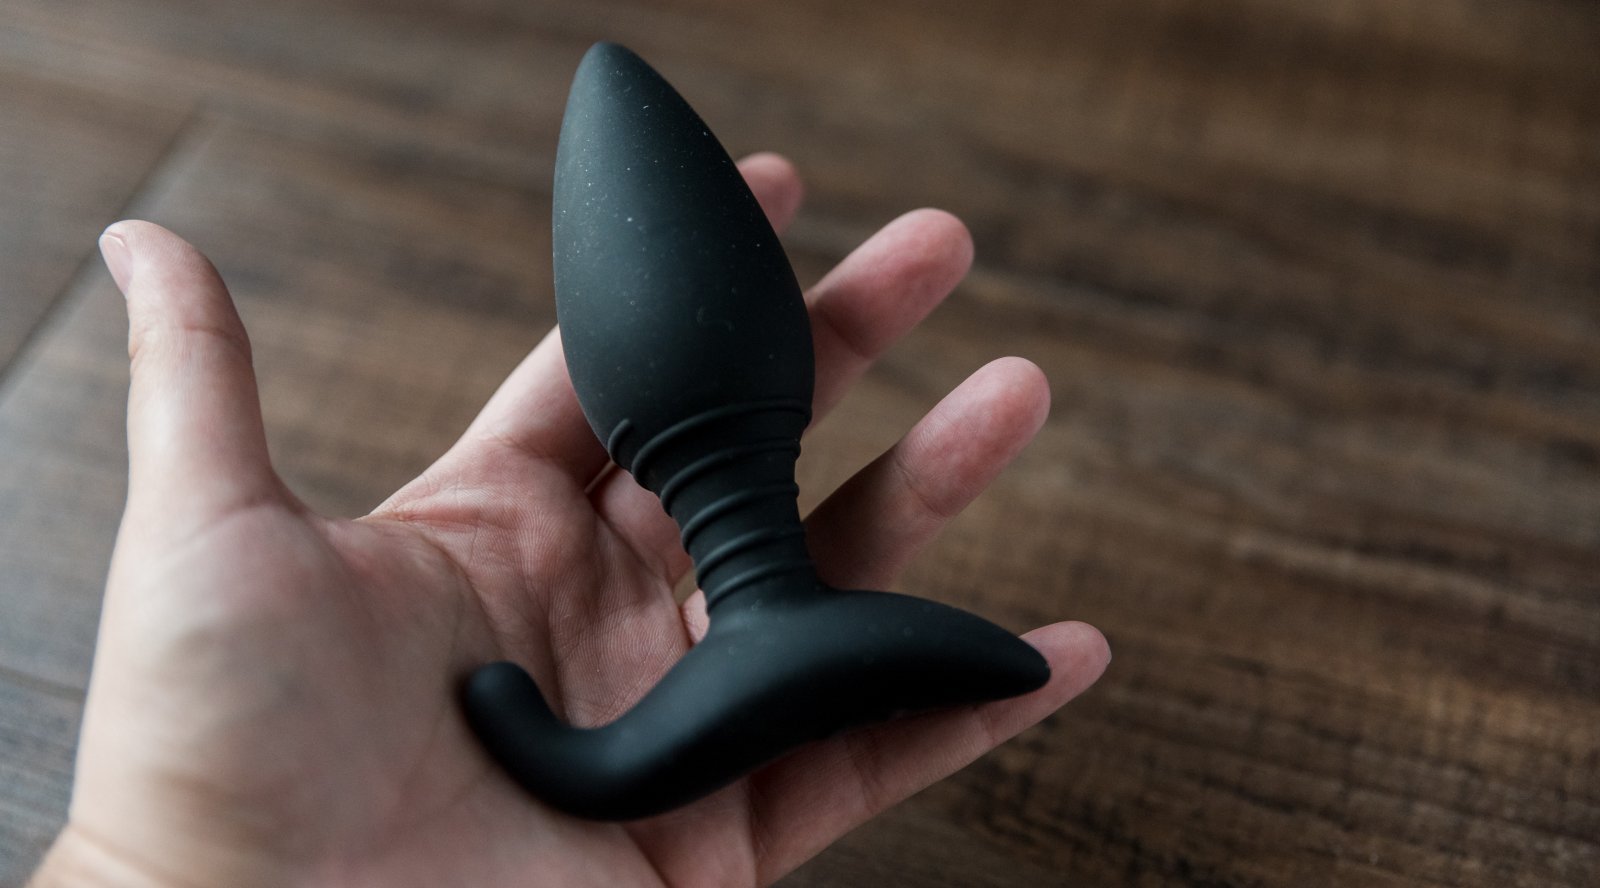 lovense hush bluetooth wifi buttplug review